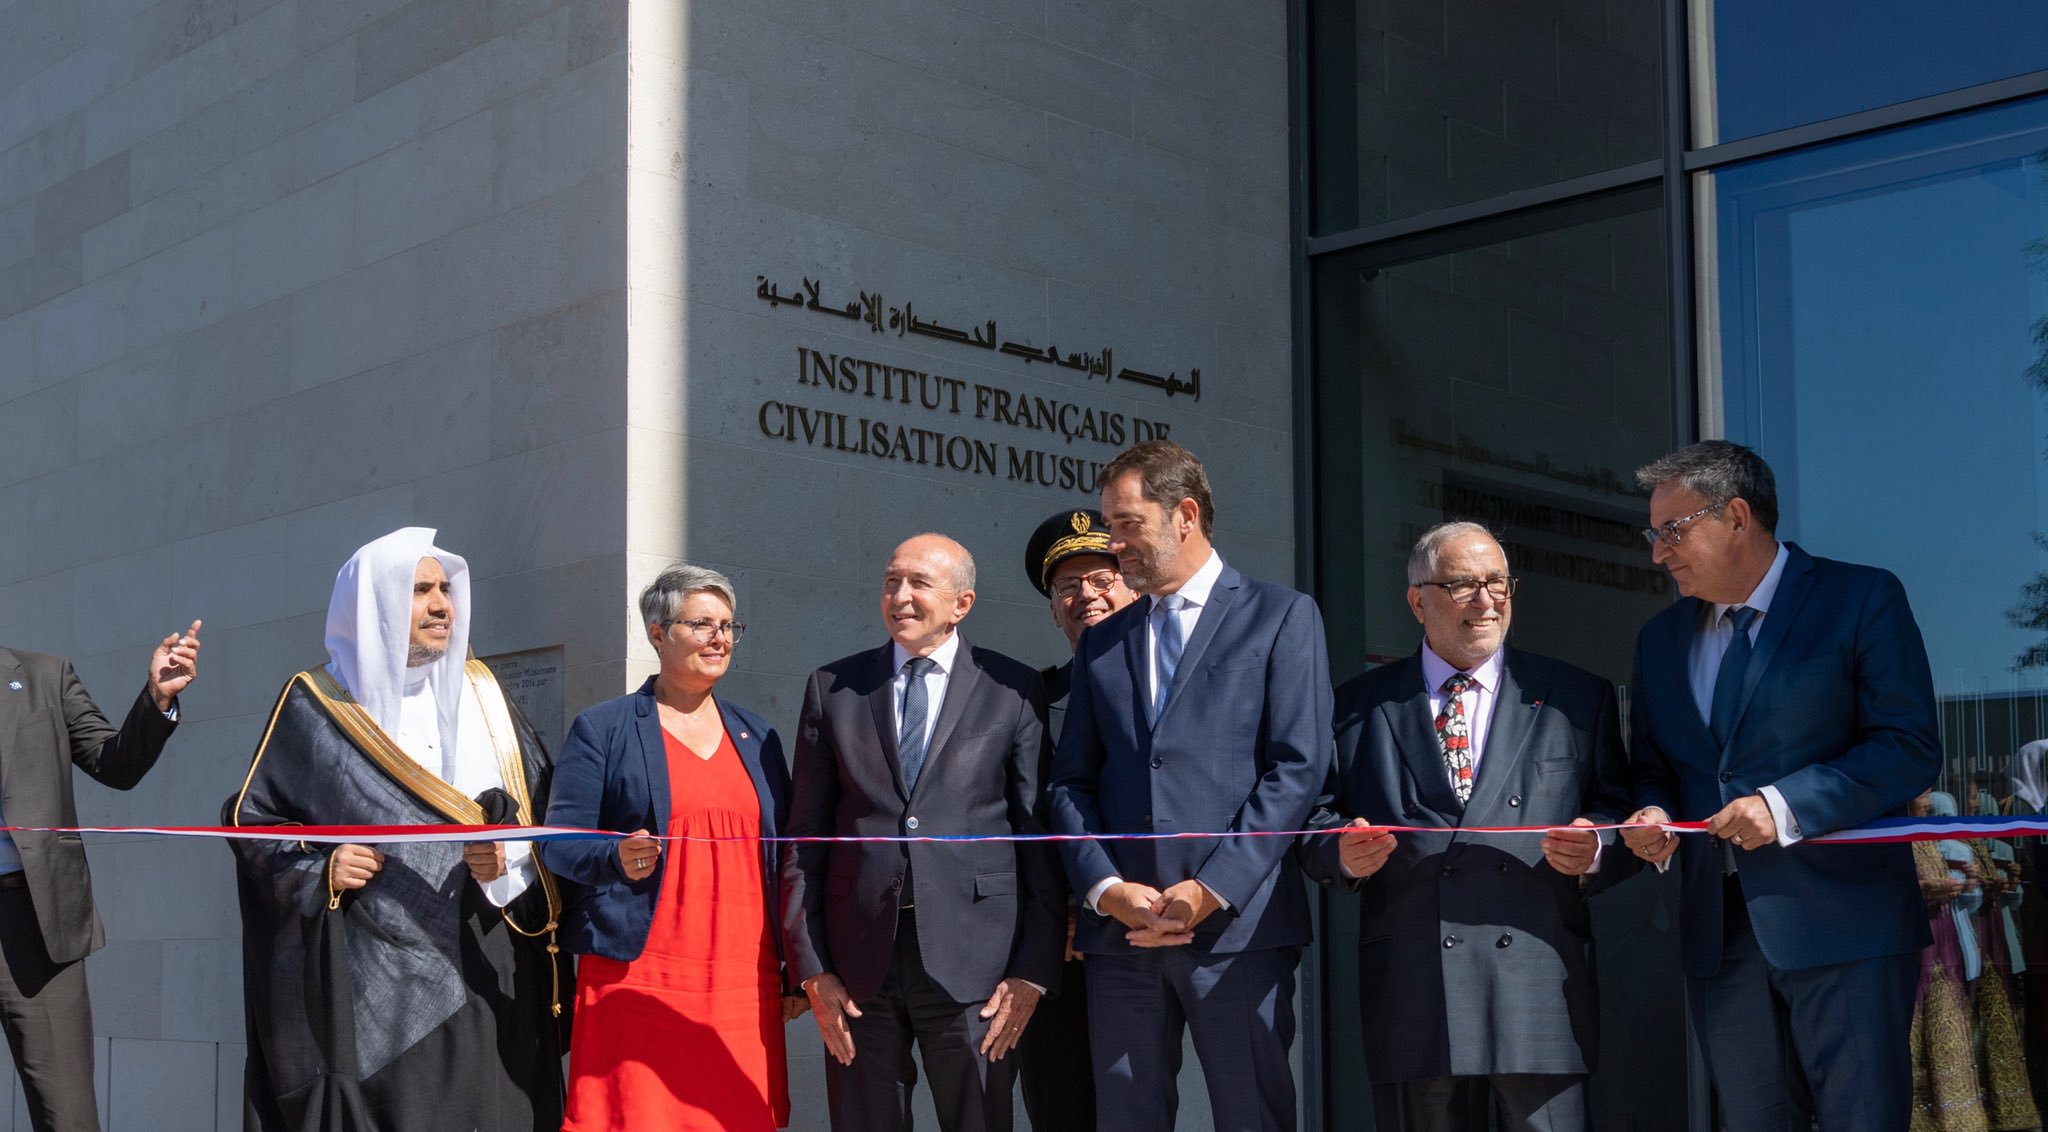 HE Dr. Mohammad Alissa gathered w/ the ifcm_lyon President, the Mayor of Lyon, the President of the Lyon Metropolis & the French Minister of Interior to inaugurate the French Institute for Islamic Civilization